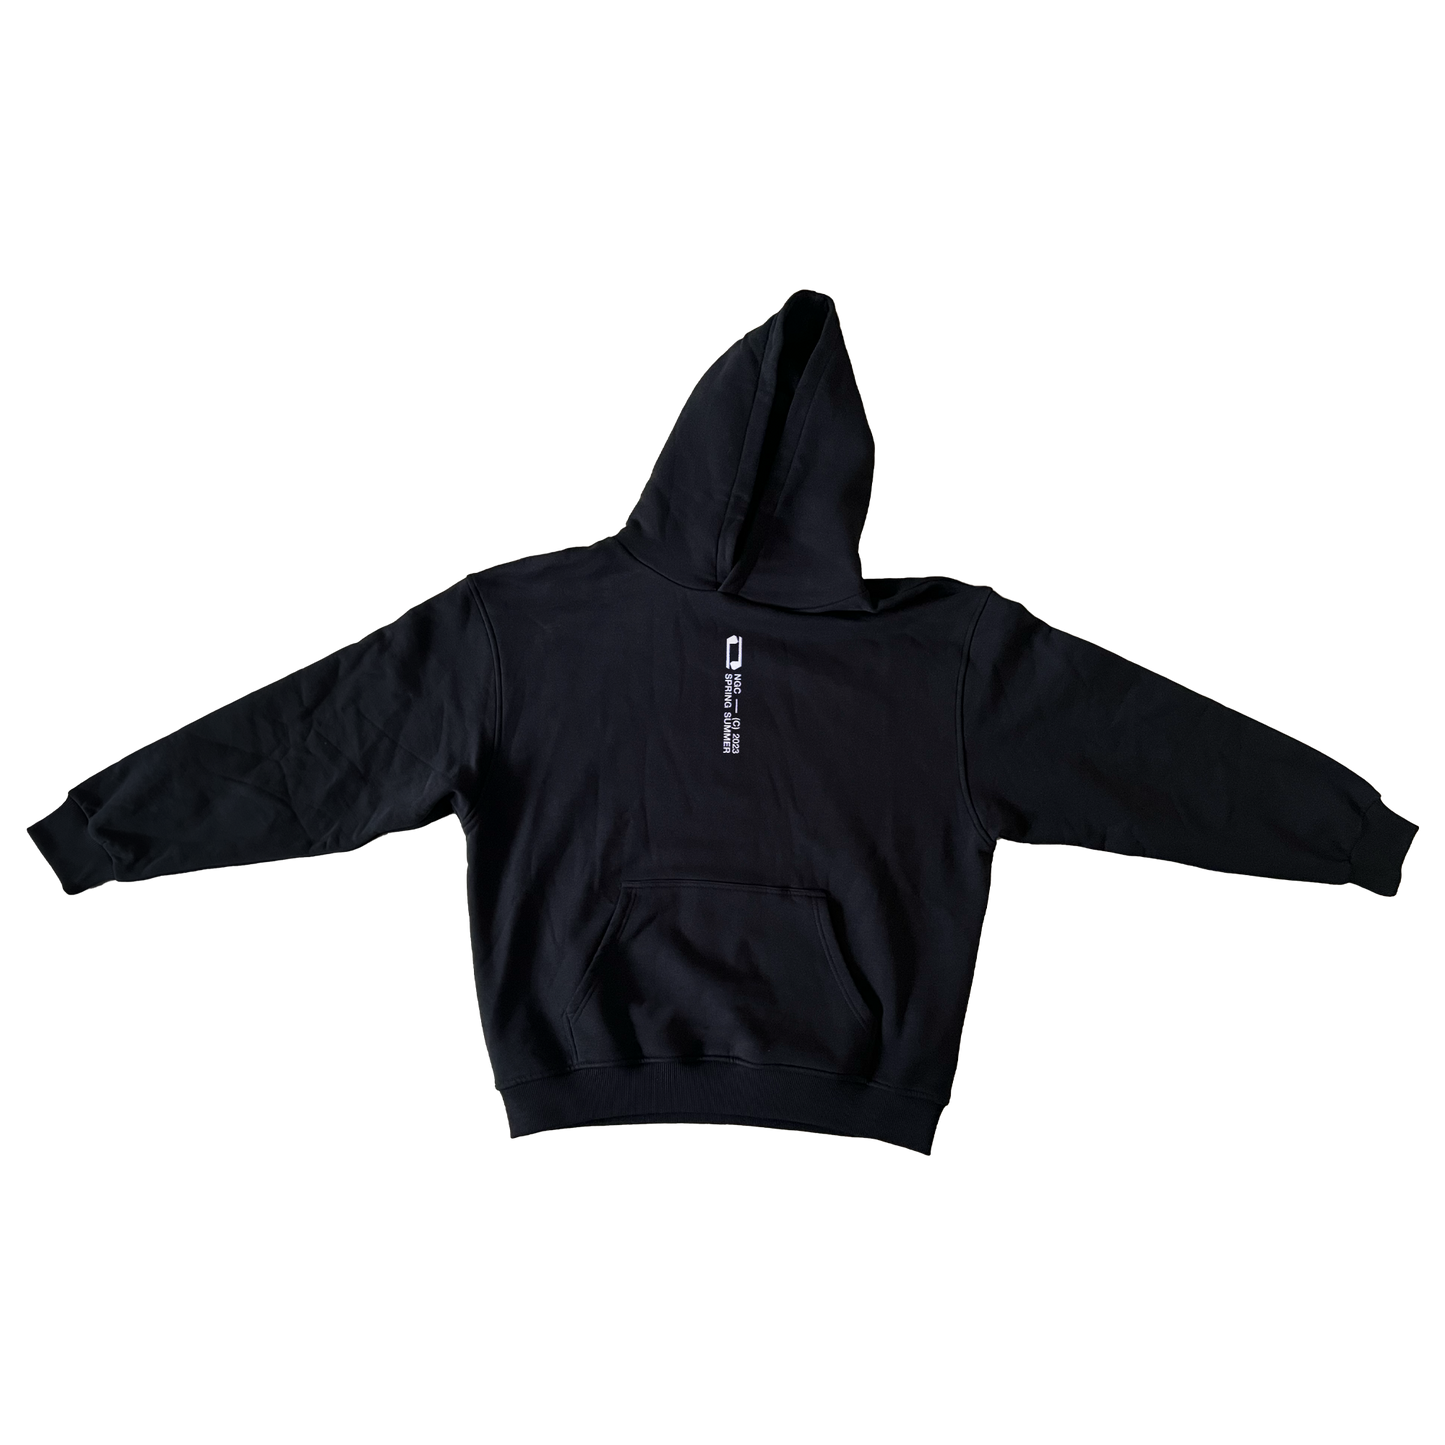 "ABSTRACT" HOODIE